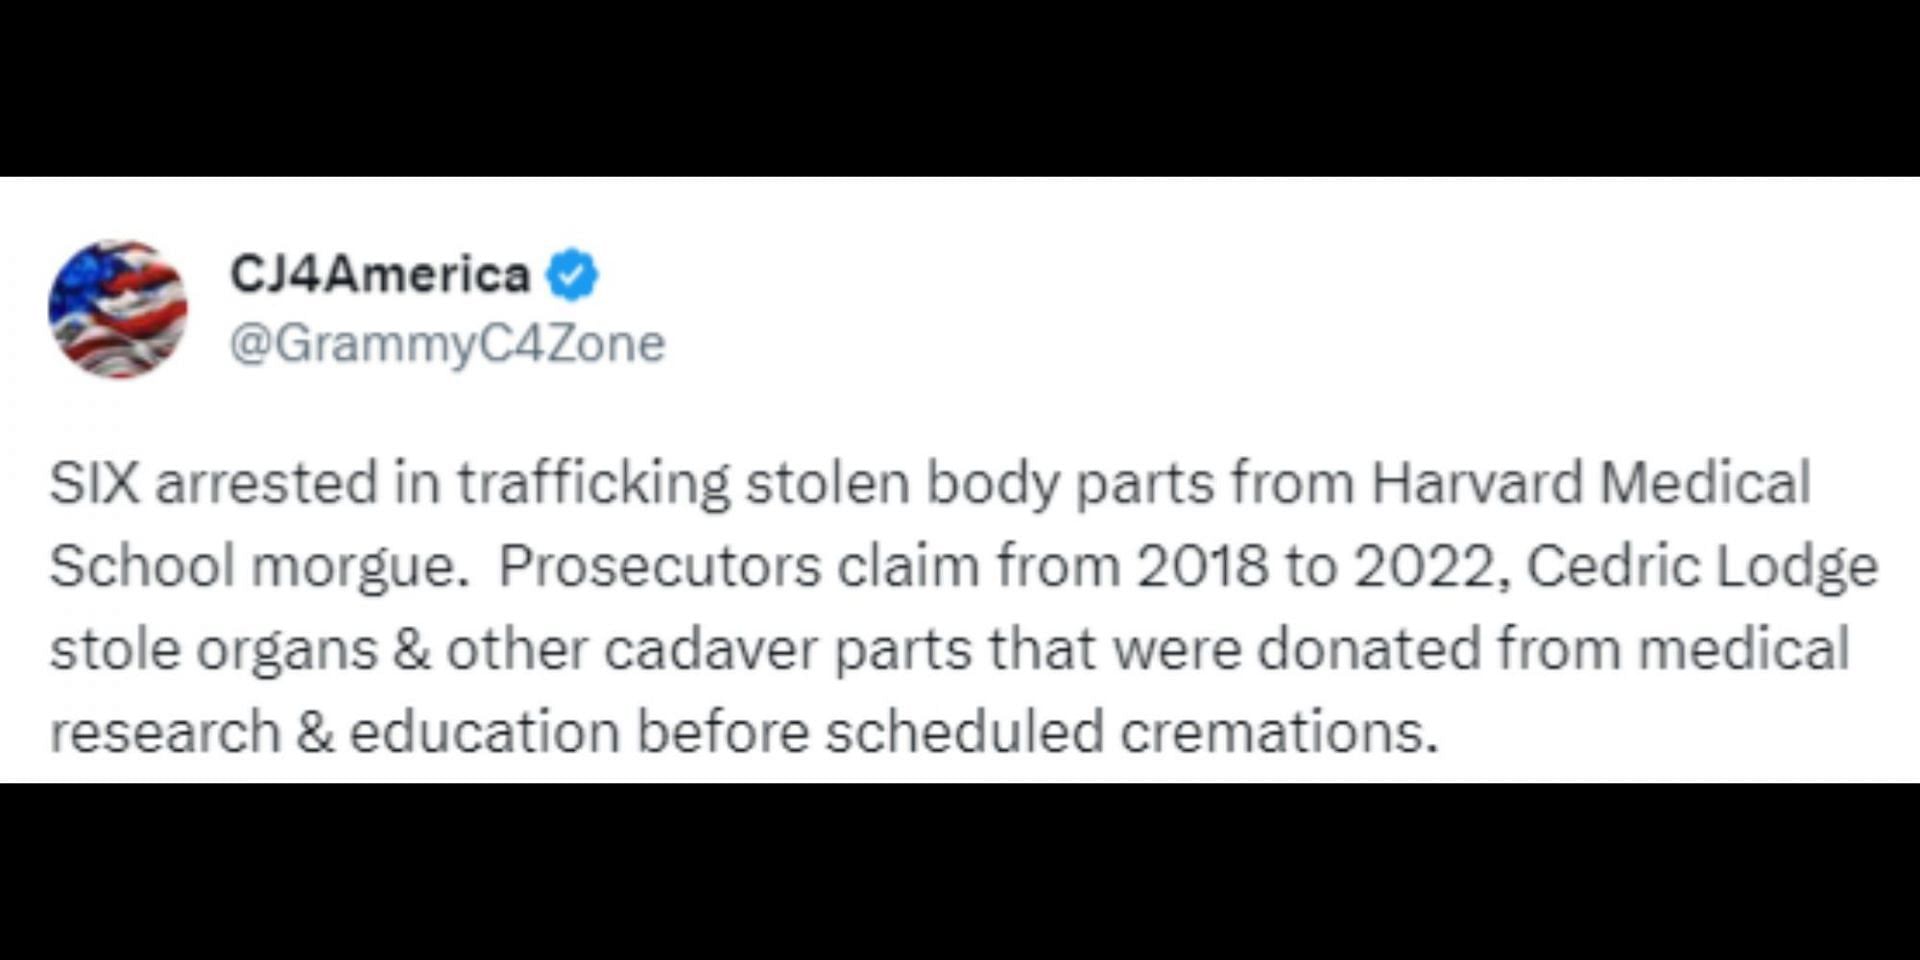 Six people were charged with theft and trafficking of human body parts. (Image via Twitter/@GrammyC4Zone)